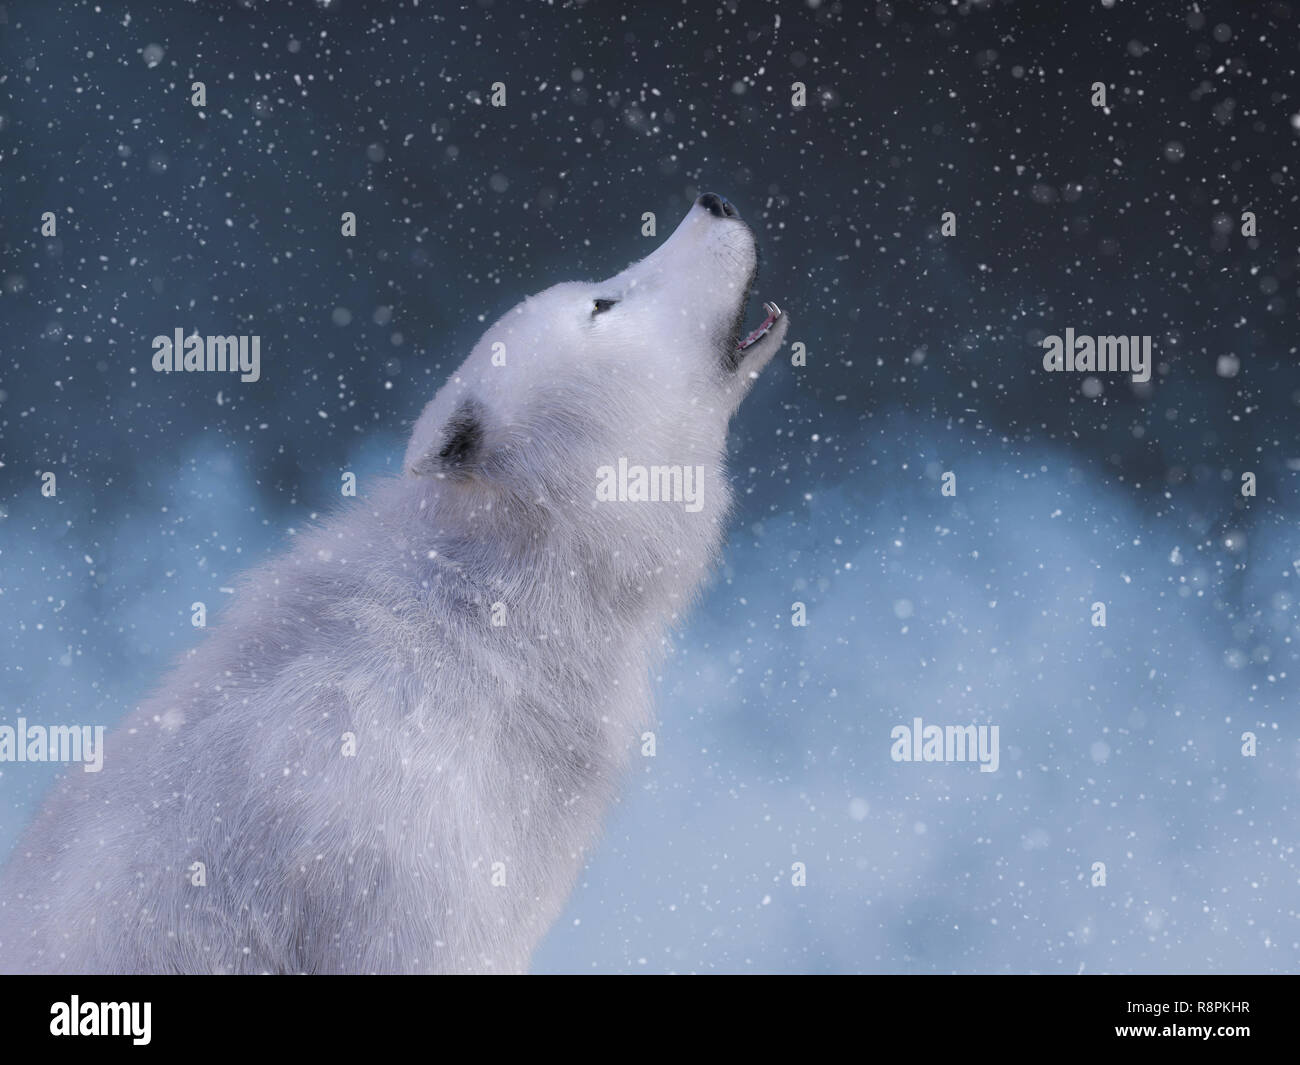 3d Rendering Of A Majestic White Wolf Sitting Down And Howling Surrounded By Magical Snow Stock Photo Alamy